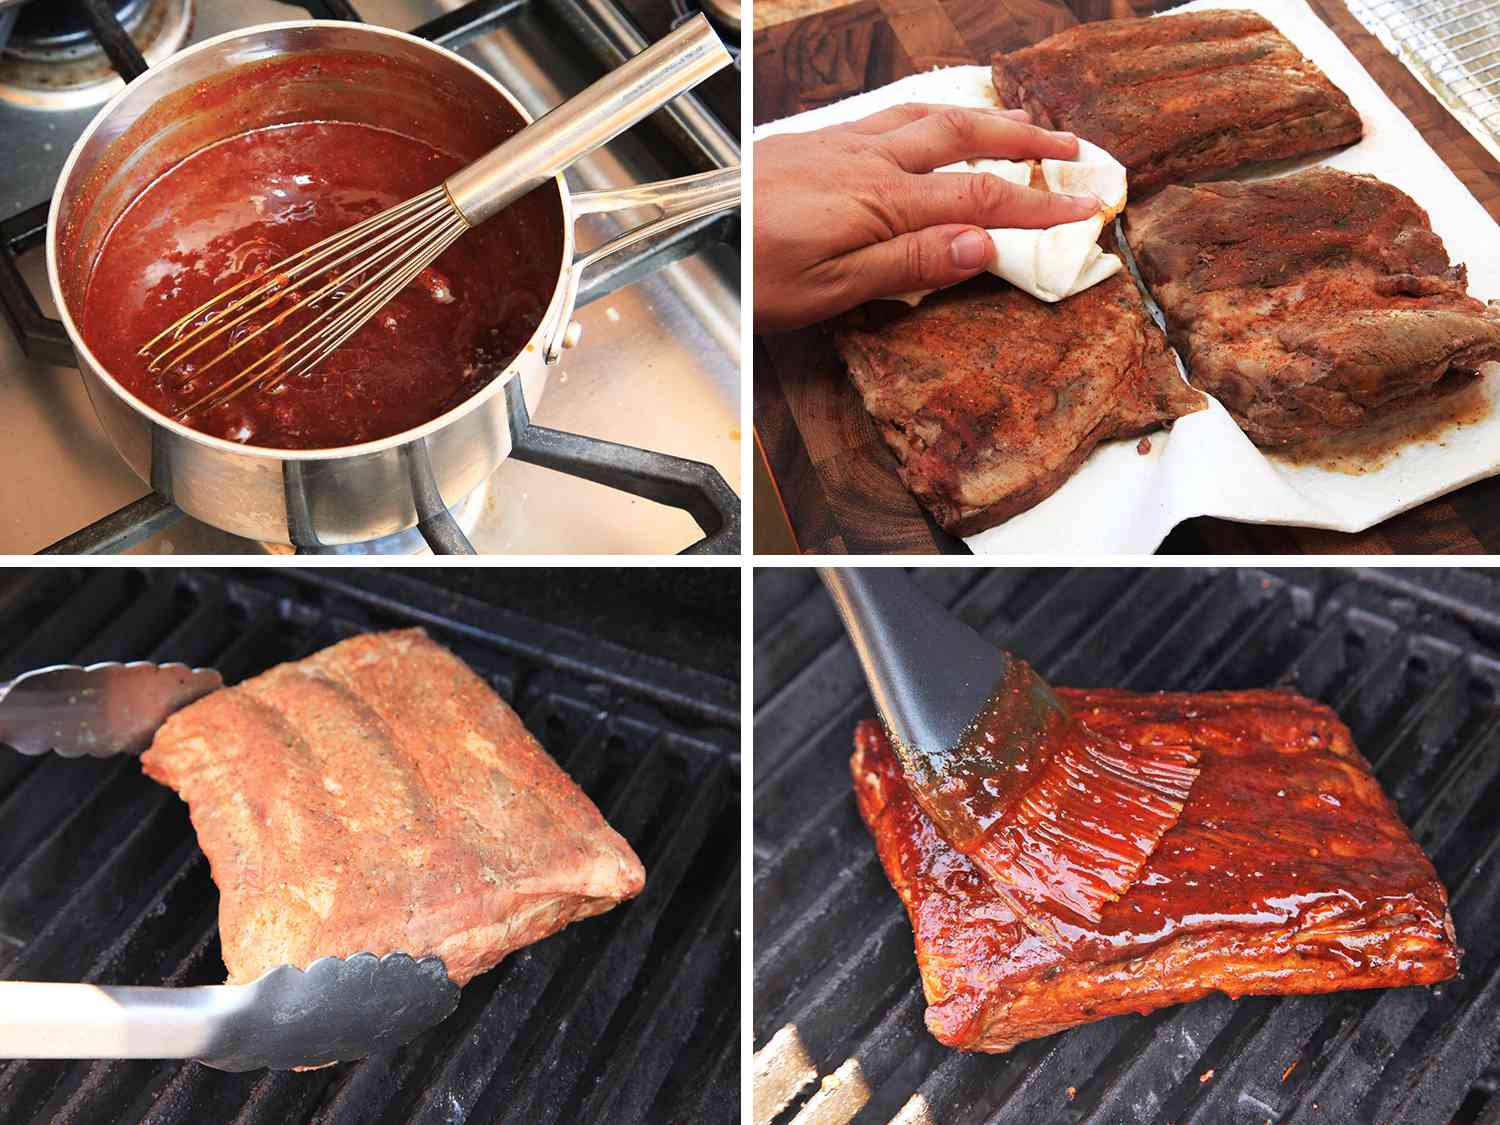 Collage of finishing sous vide pork ribs with a sauce: whisking barbecue sauce on stovetop, patting cooked racks of ribs dry, browning ribs over a grill, brushing on barbecue sauce